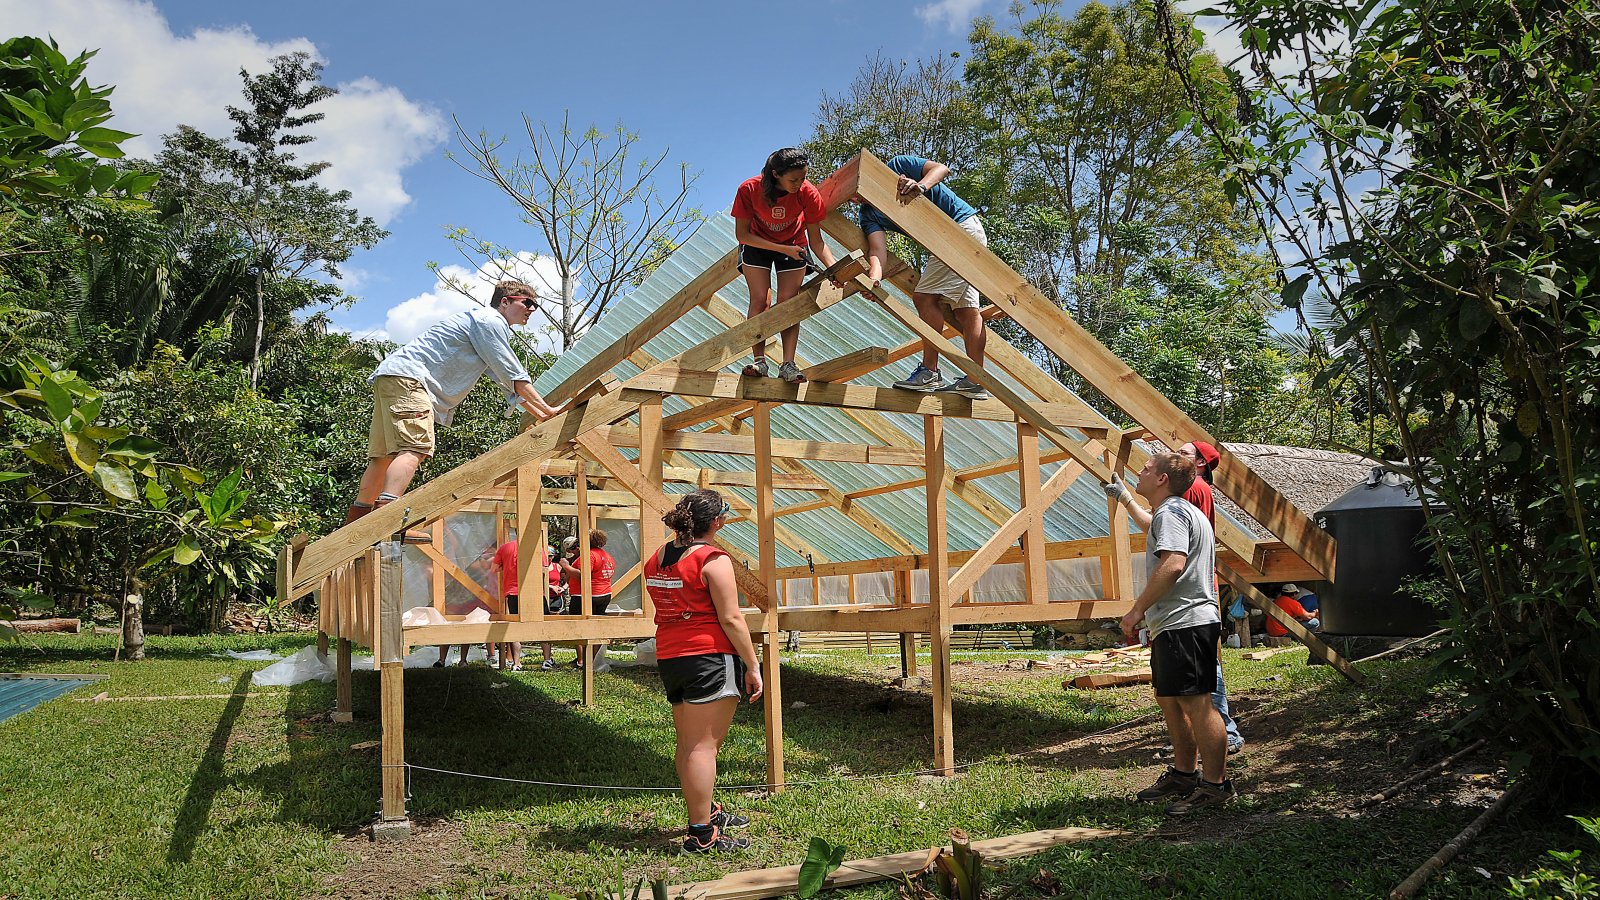 Student volunteers work on building a house frame